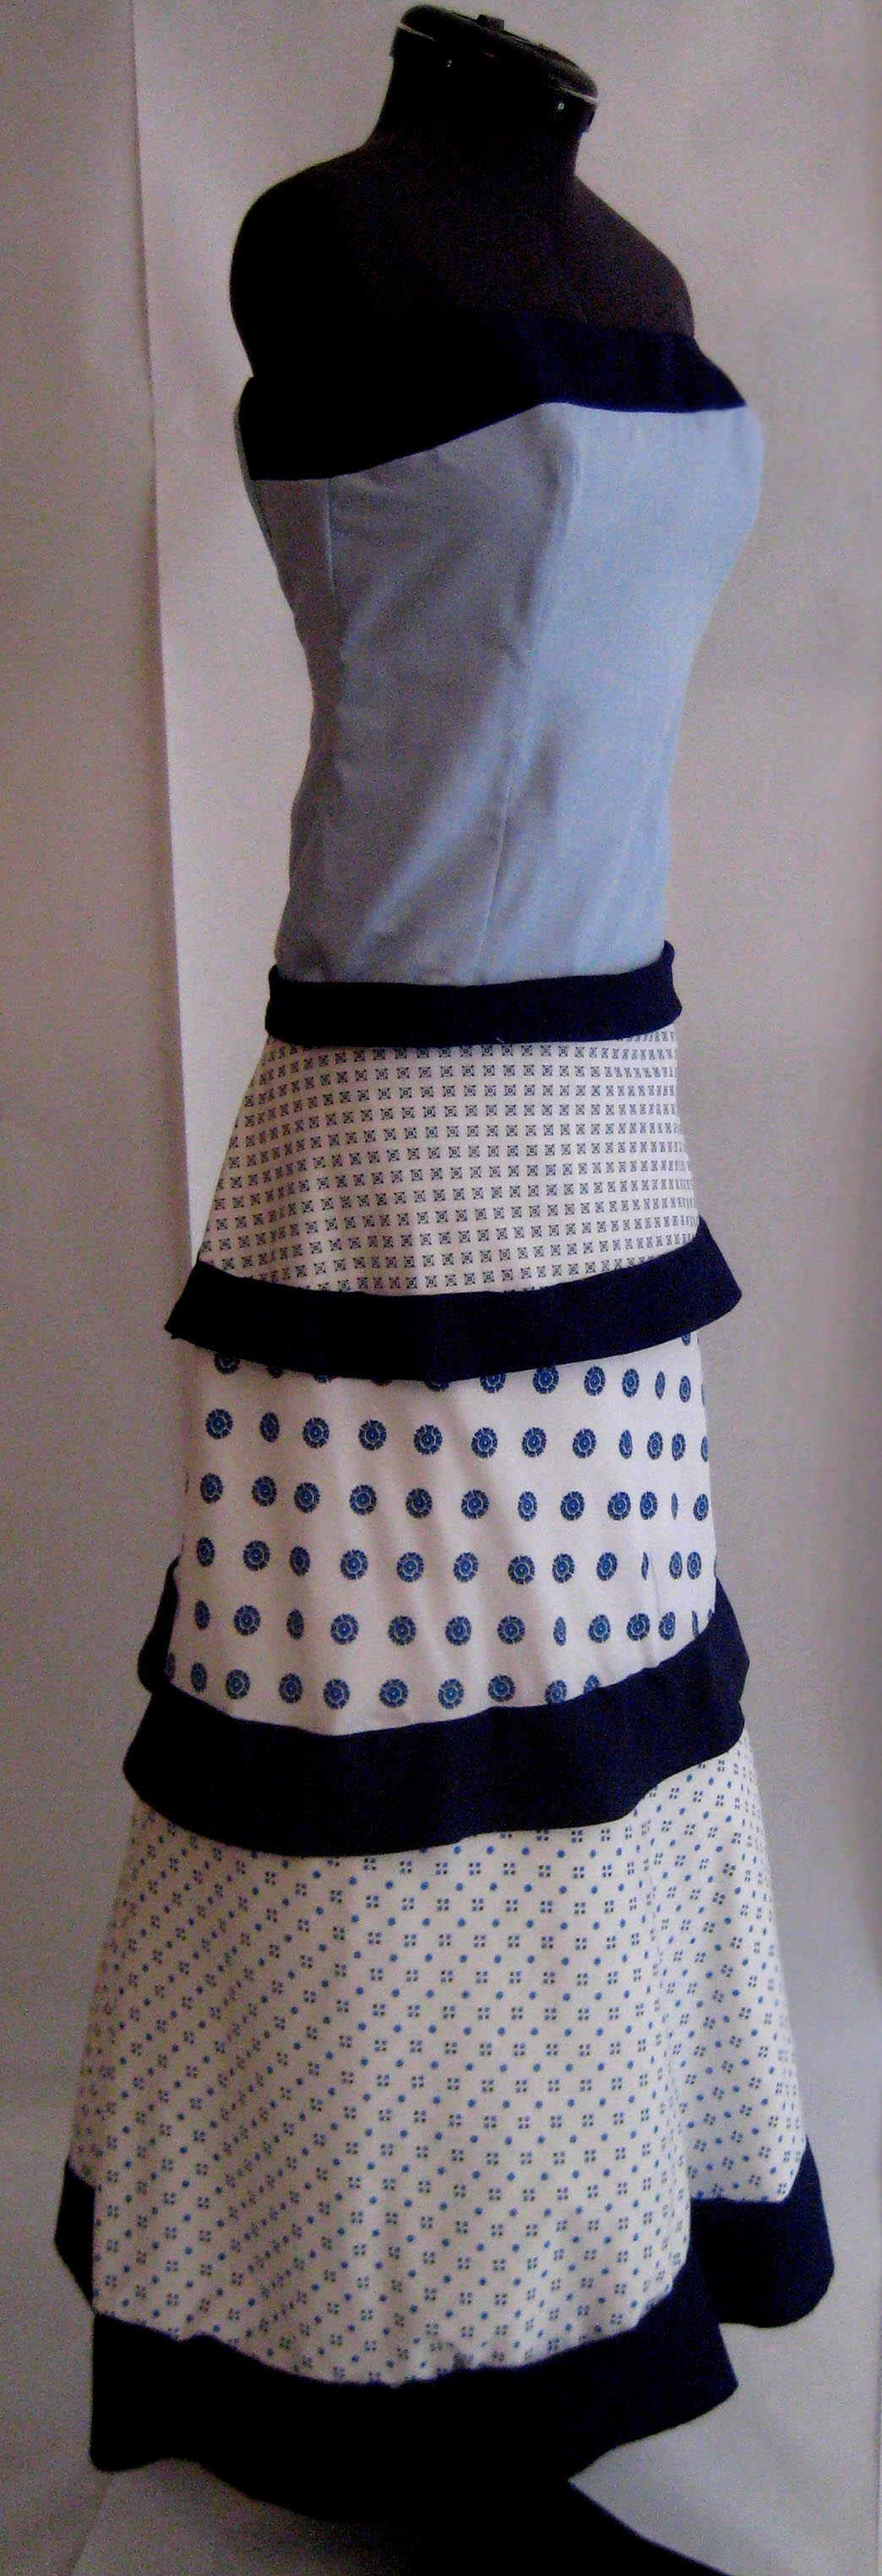 Image showing a side view of a dress on a dress form, with the bodice made of light blue fabric and the skirt made of 3 patterned fabrics separated by black strips